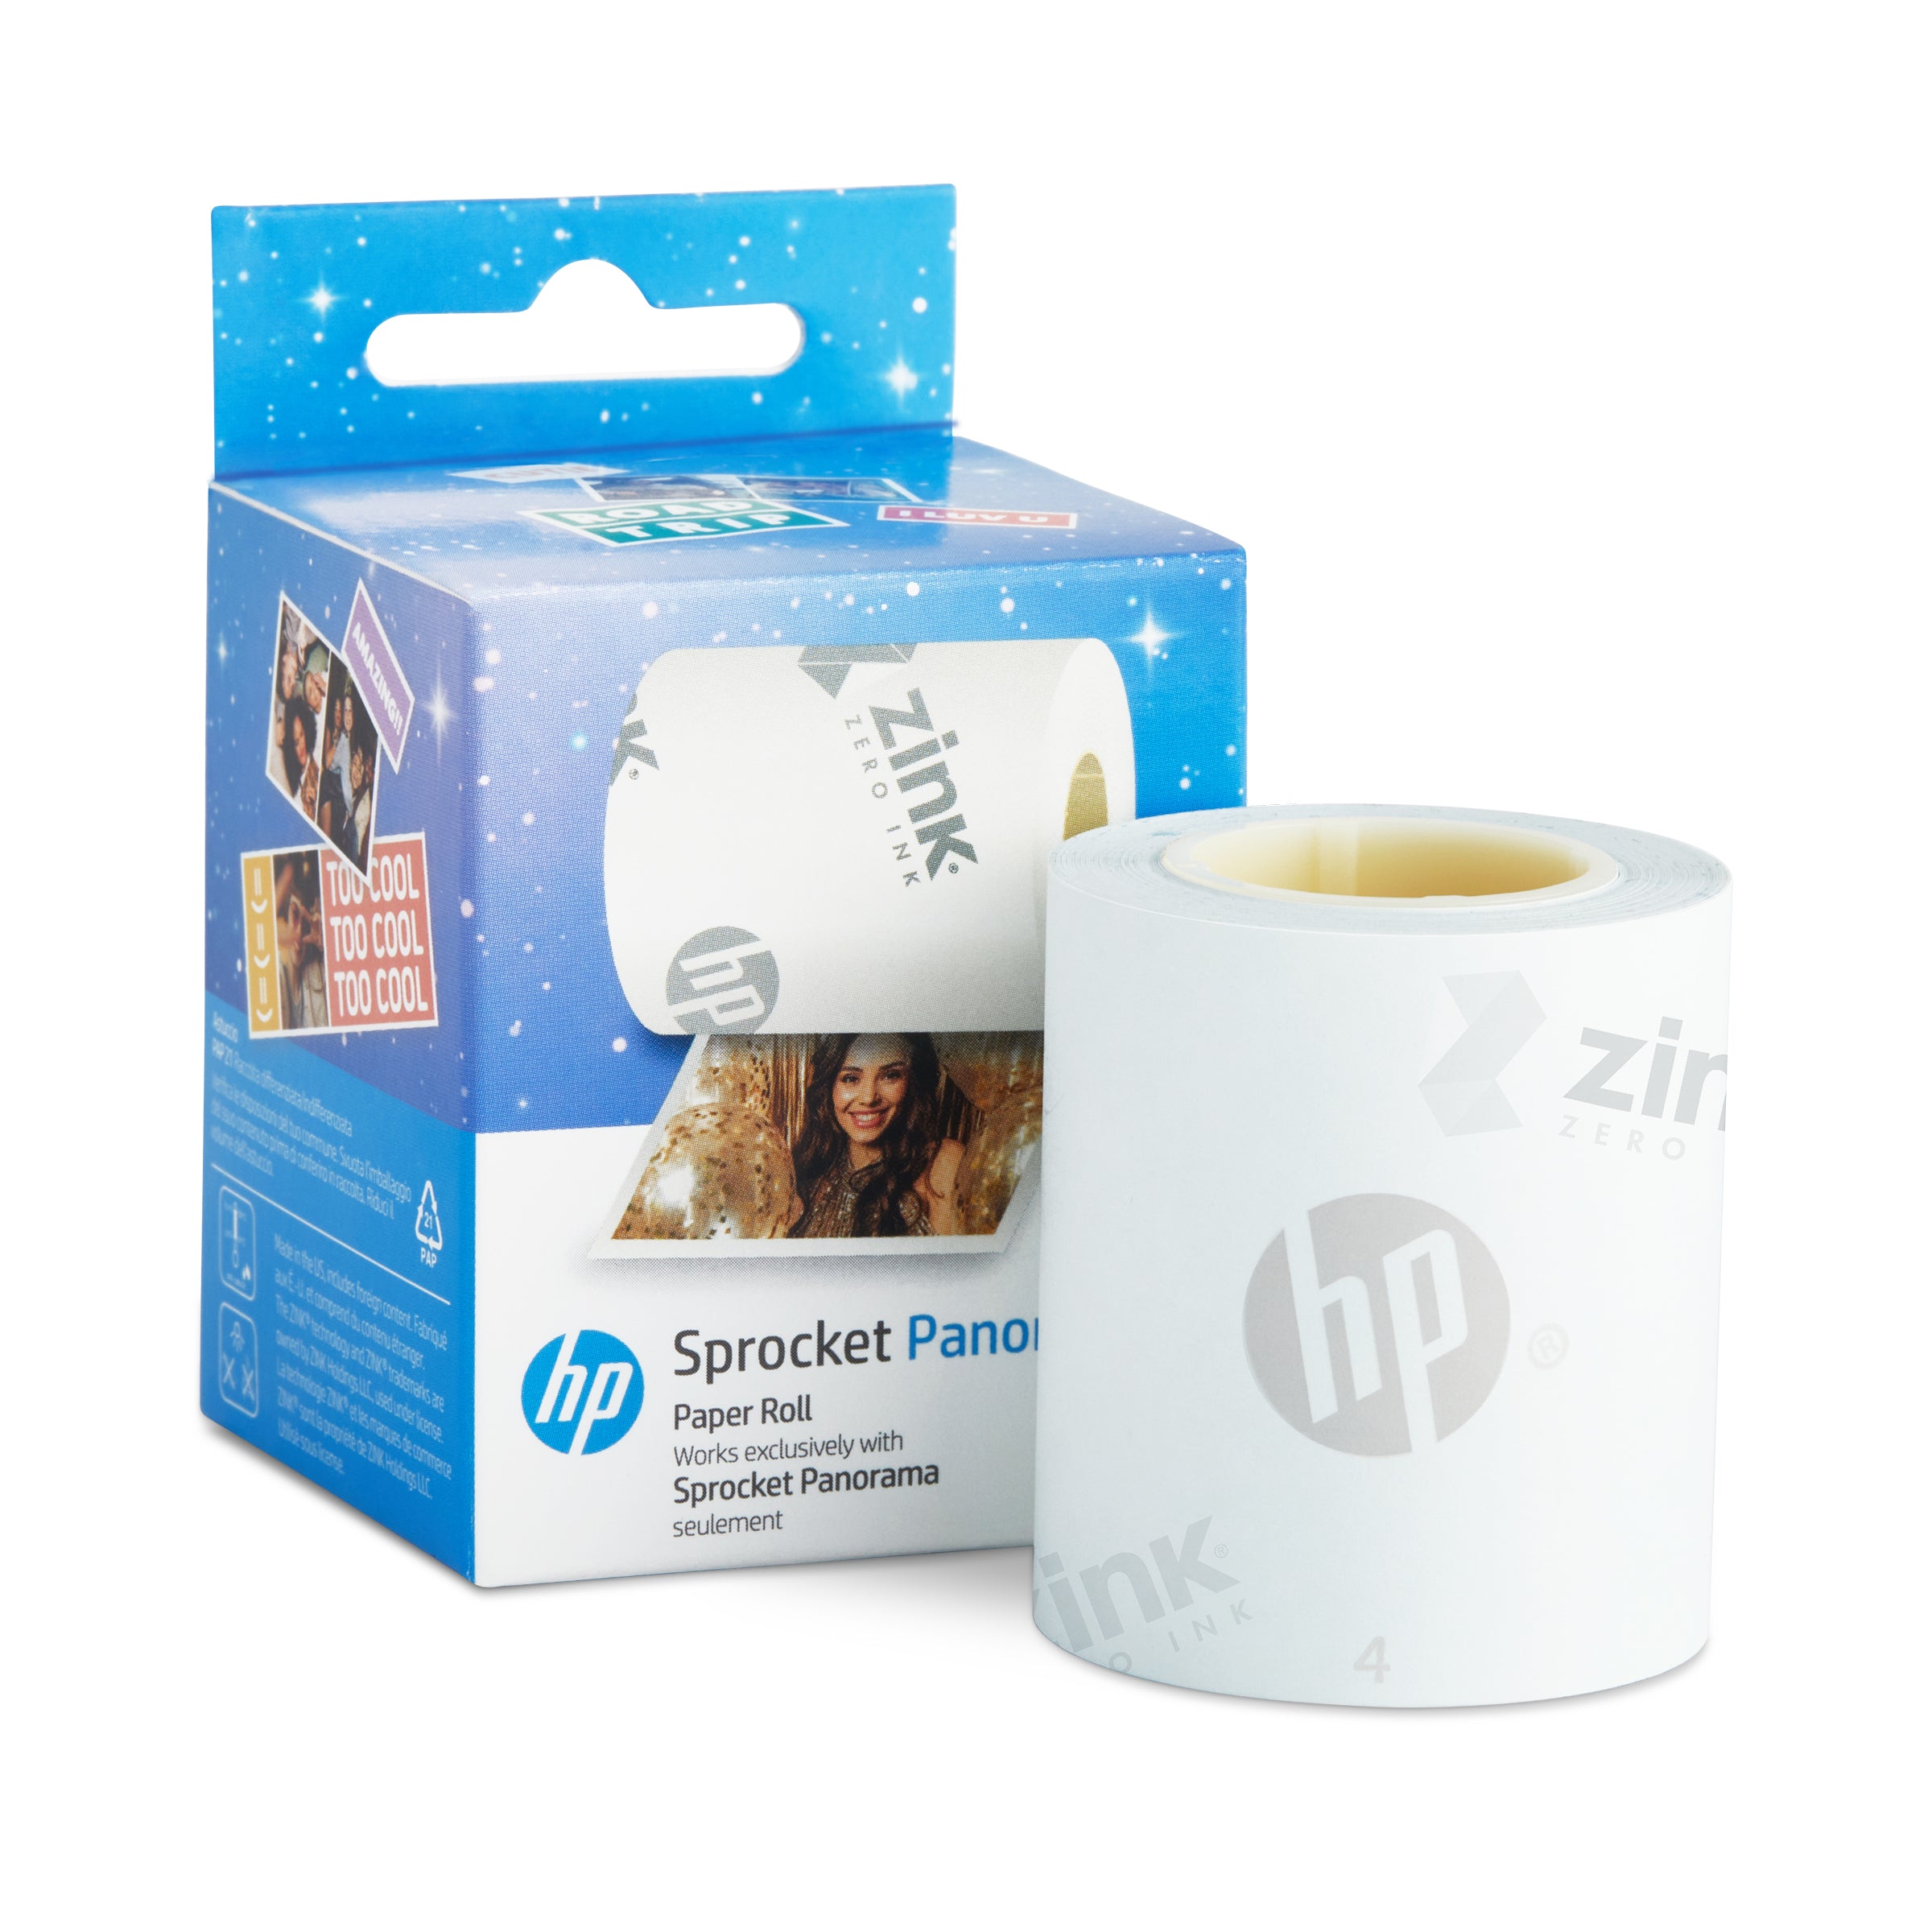 HP Sprocket Panorama Instant Portable Color Label & Photo Printer (Pink) Gift Bundle with case, HP Zink roll, photo album, markers, stickers and frames Sprocket Printers